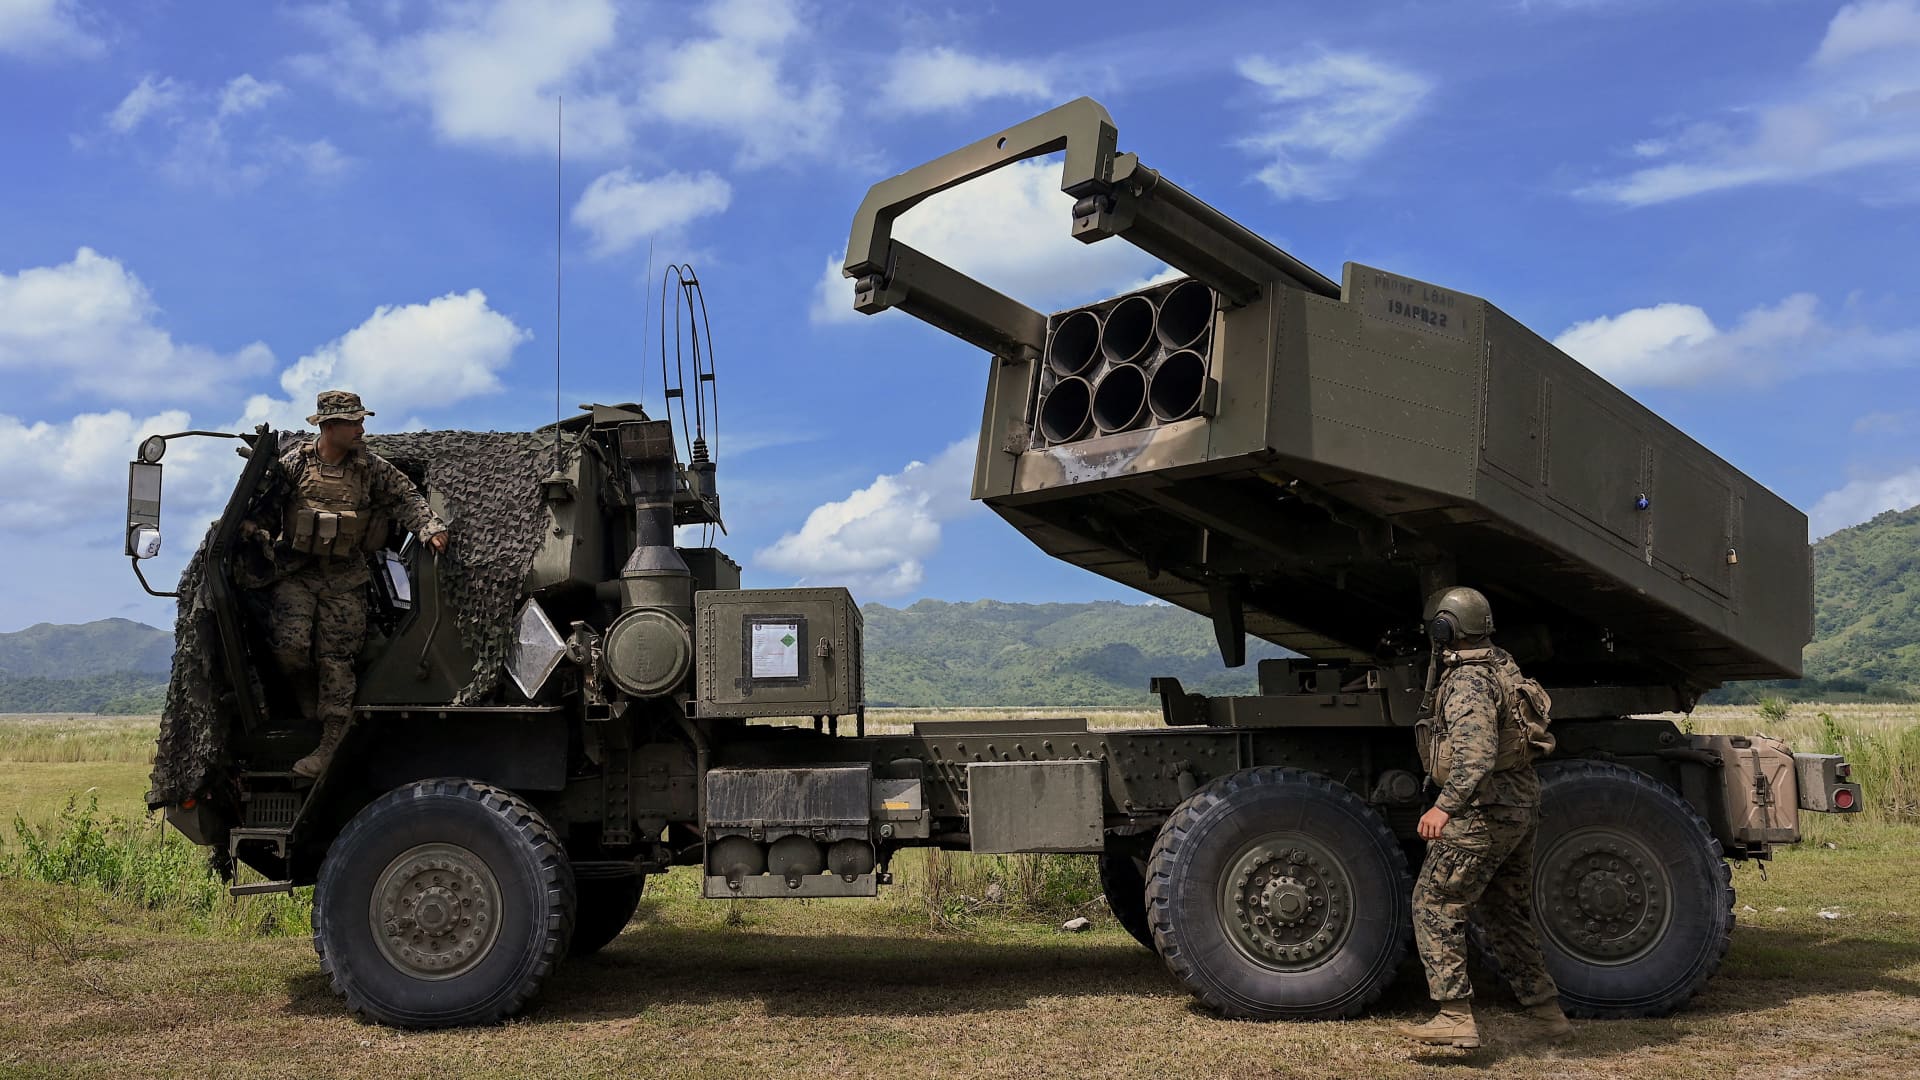 U.S. Marines operate a HIMARS vehicle in the Philippines as part of joint exercises with that country in October 2022.